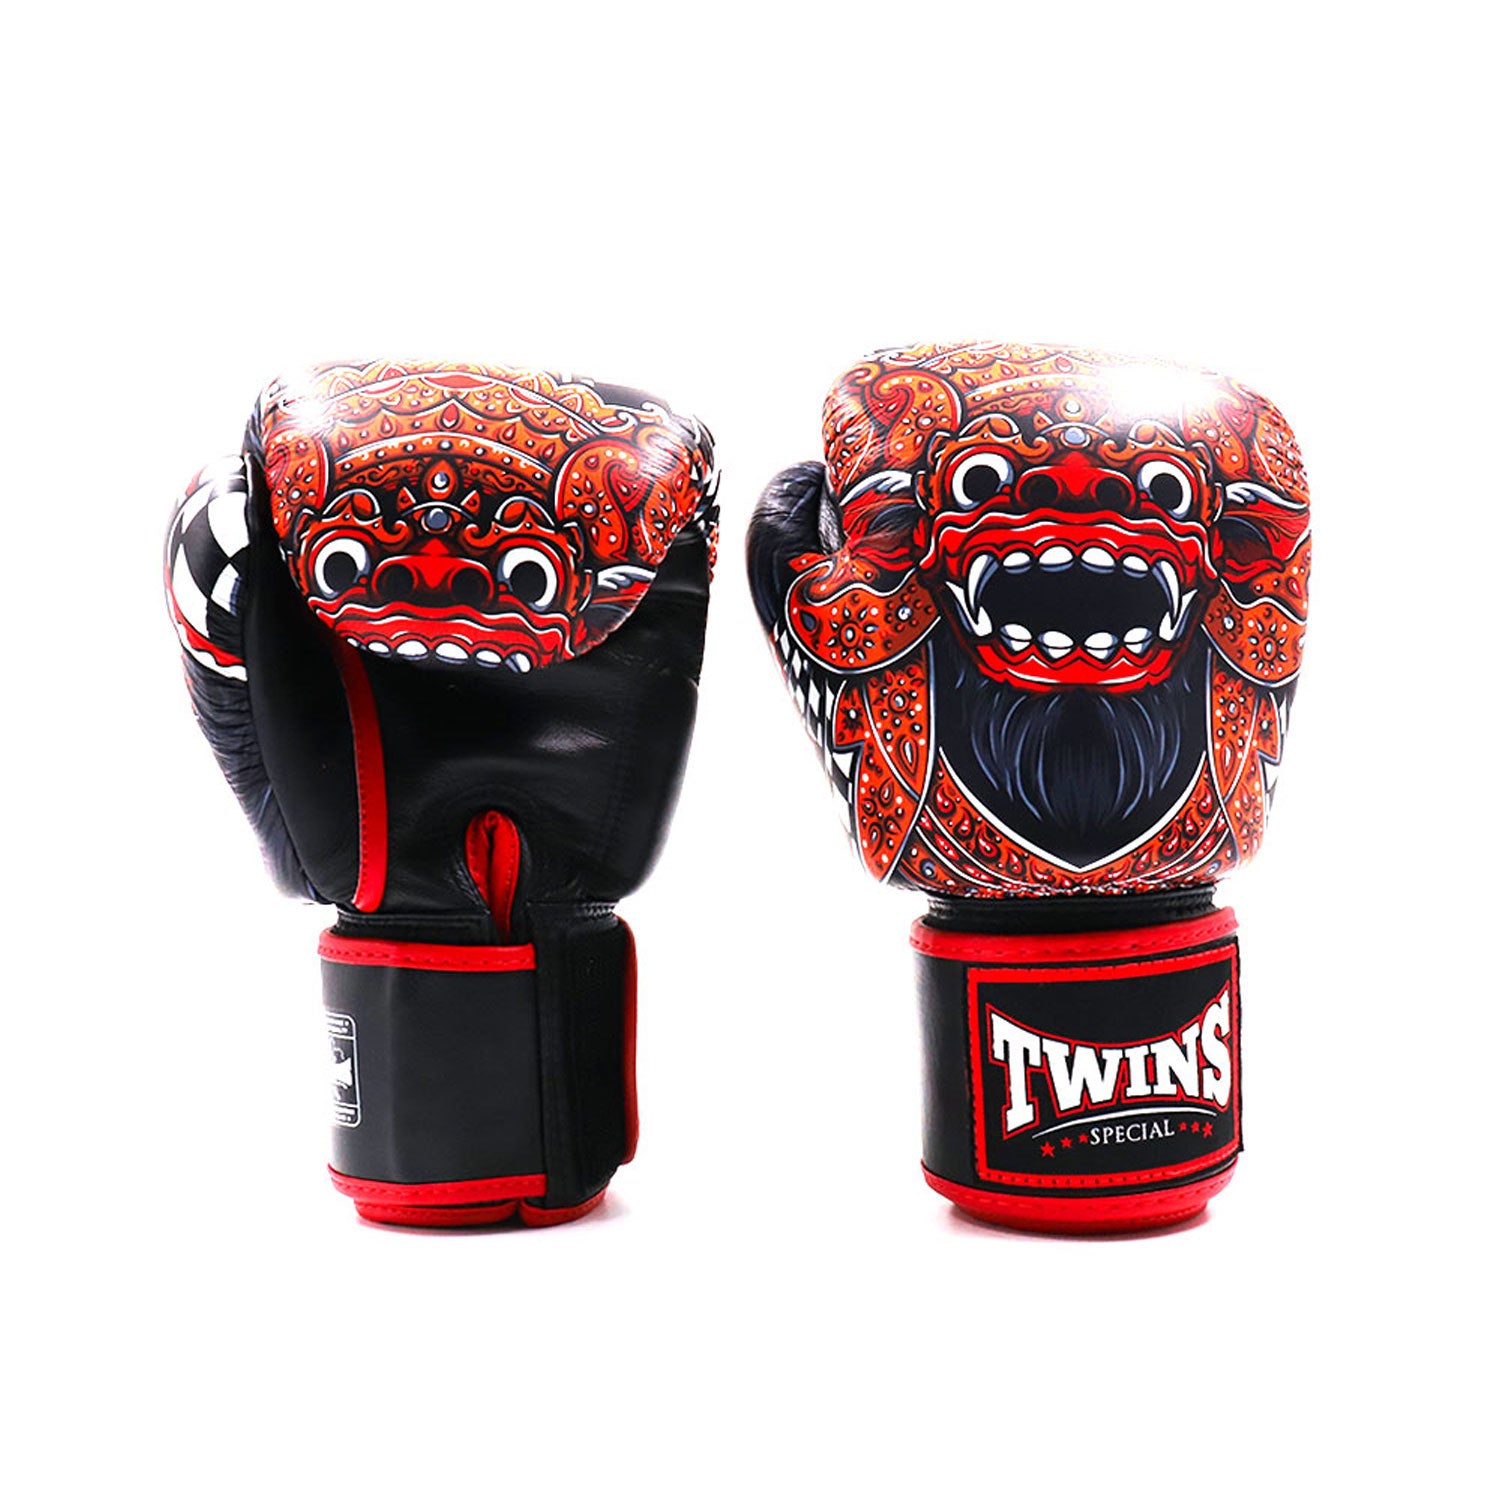 FBGVL3-59 Twins Barong Boxing Gloves Black-Red